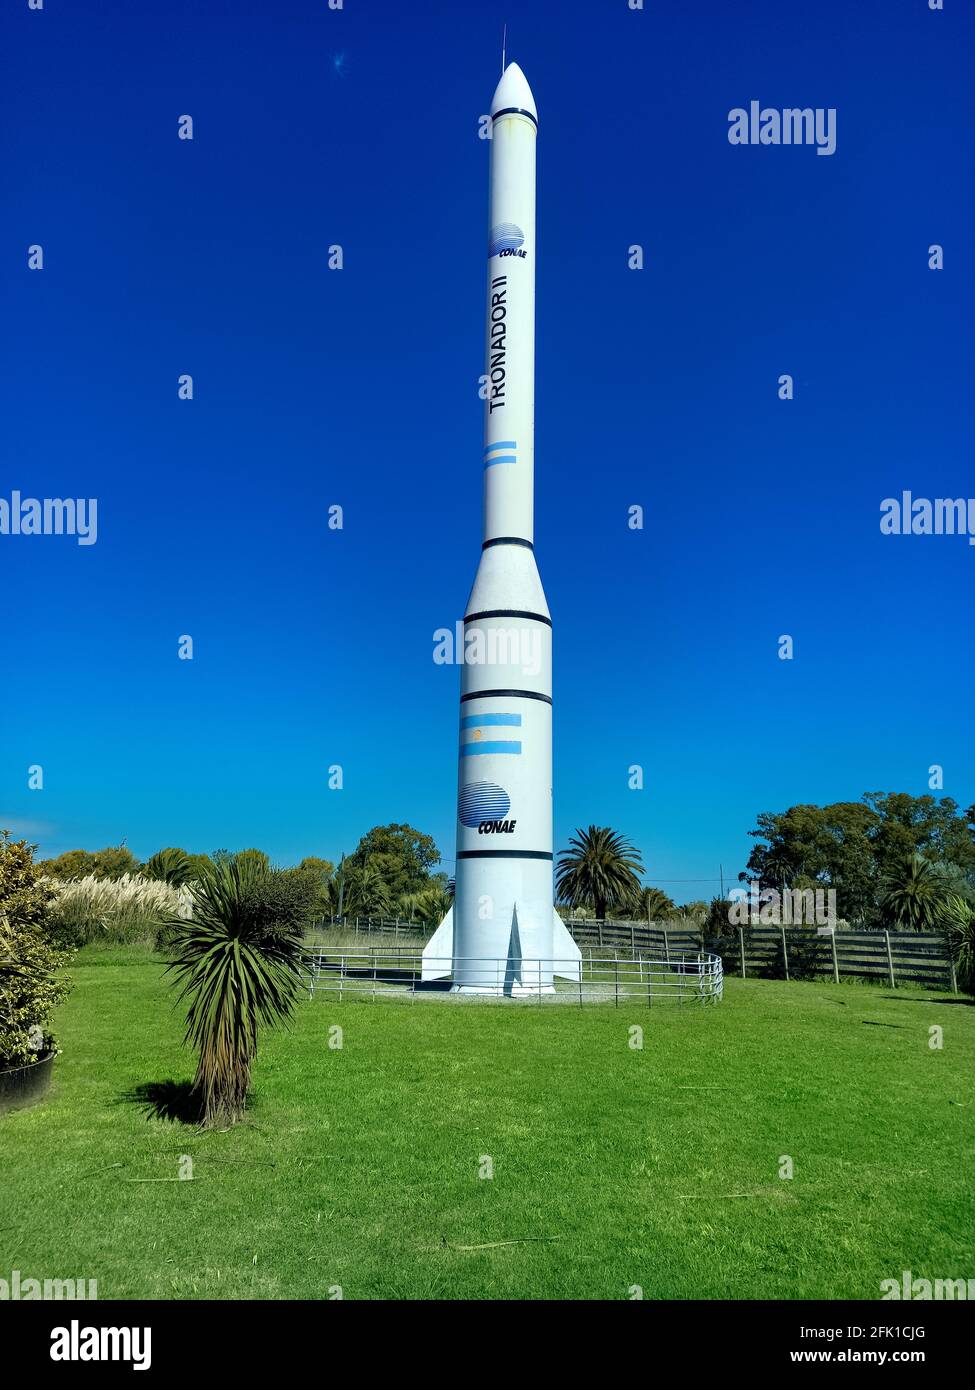 PIPINAS, PUNTA INDIO, BUENOS AIRES, ARGENTINA - Apr 06, 2021: Shot of the replica of the Tronador II space launcher designed to place satellites into Stock Photo